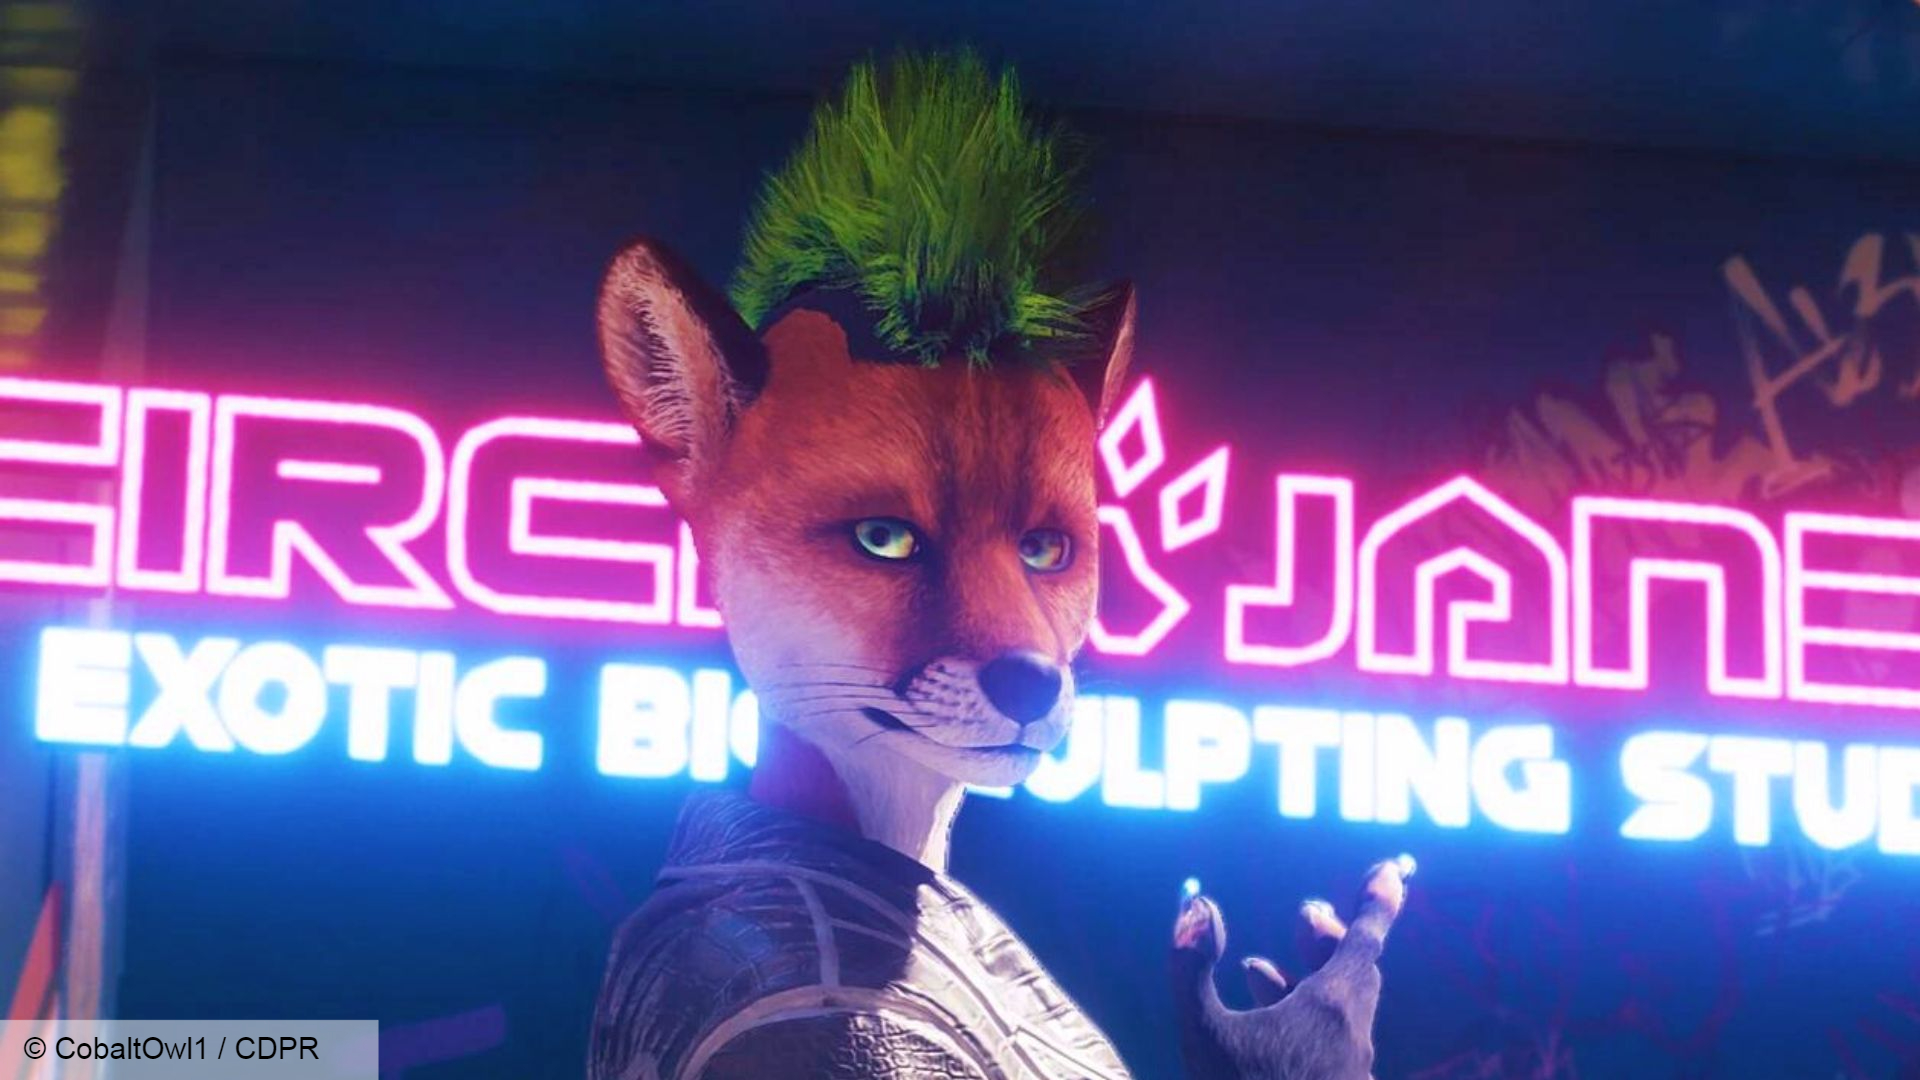 Cyberpunk 2077 has furries now, and they’re canon